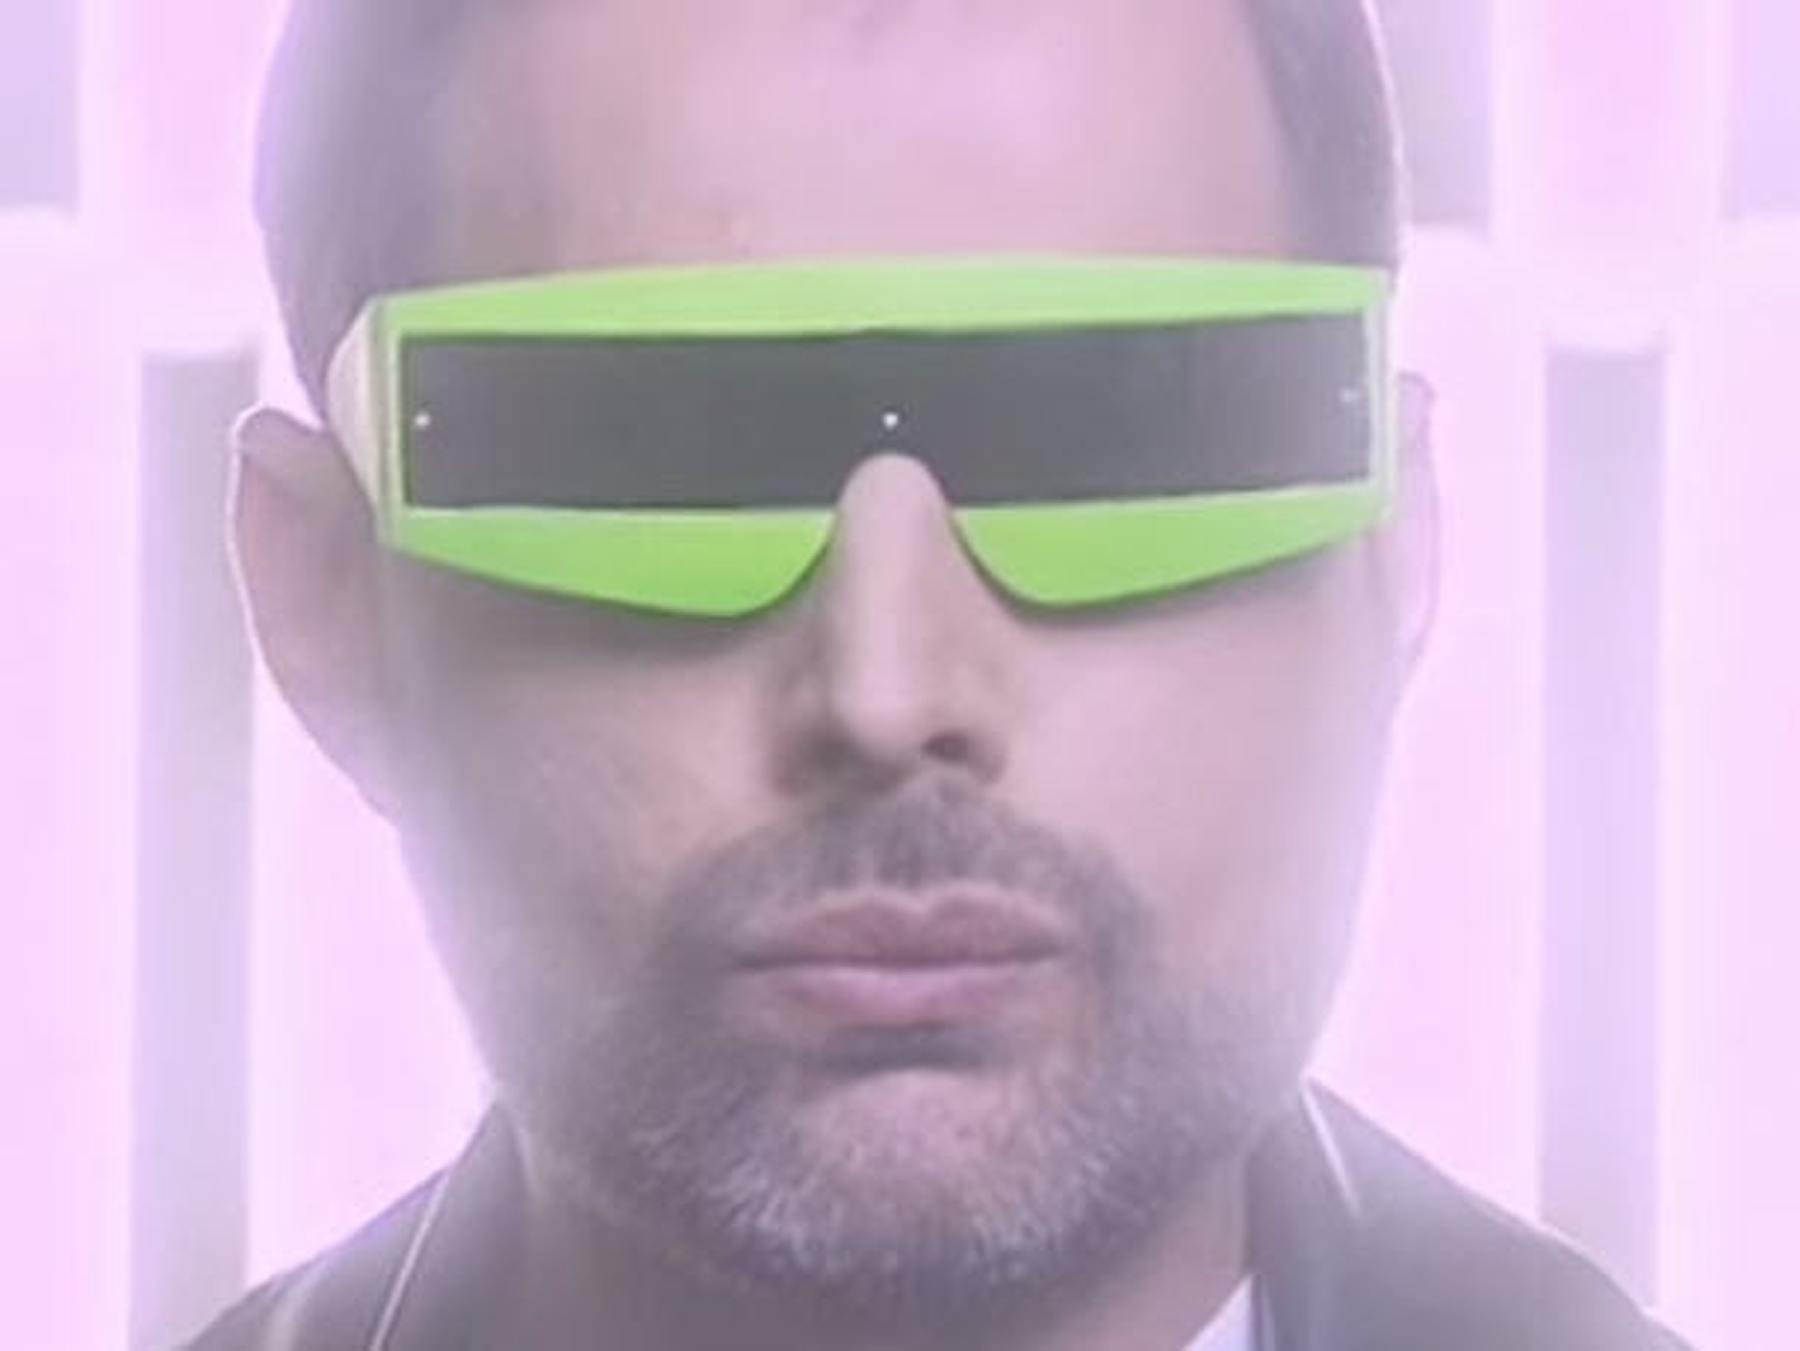 FREDDIE MERCURY "THE INVISIBLE MAN" VIDEO WORN SUNGLASSES  A pair of neon green and black wraparound - Image 6 of 7